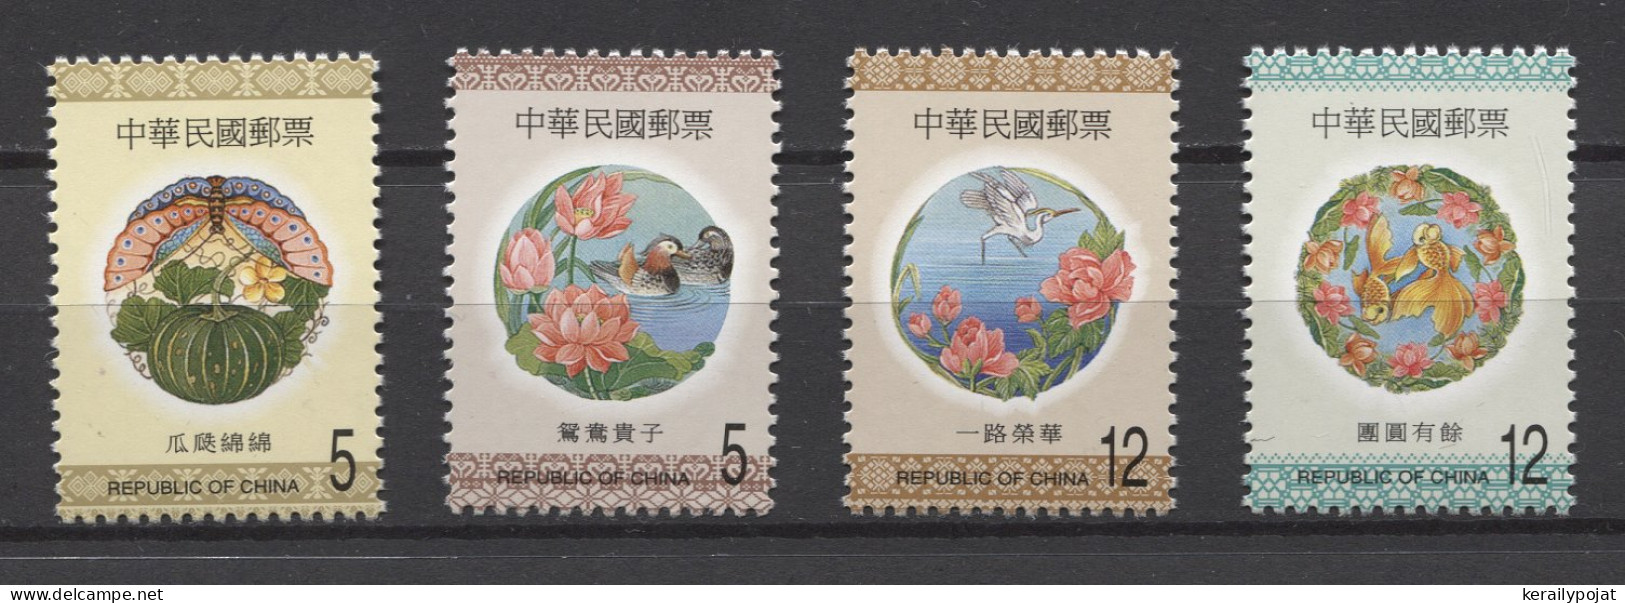 Taiwan - 1999 New Year's Wishes MNH__(TH-24844) - Neufs